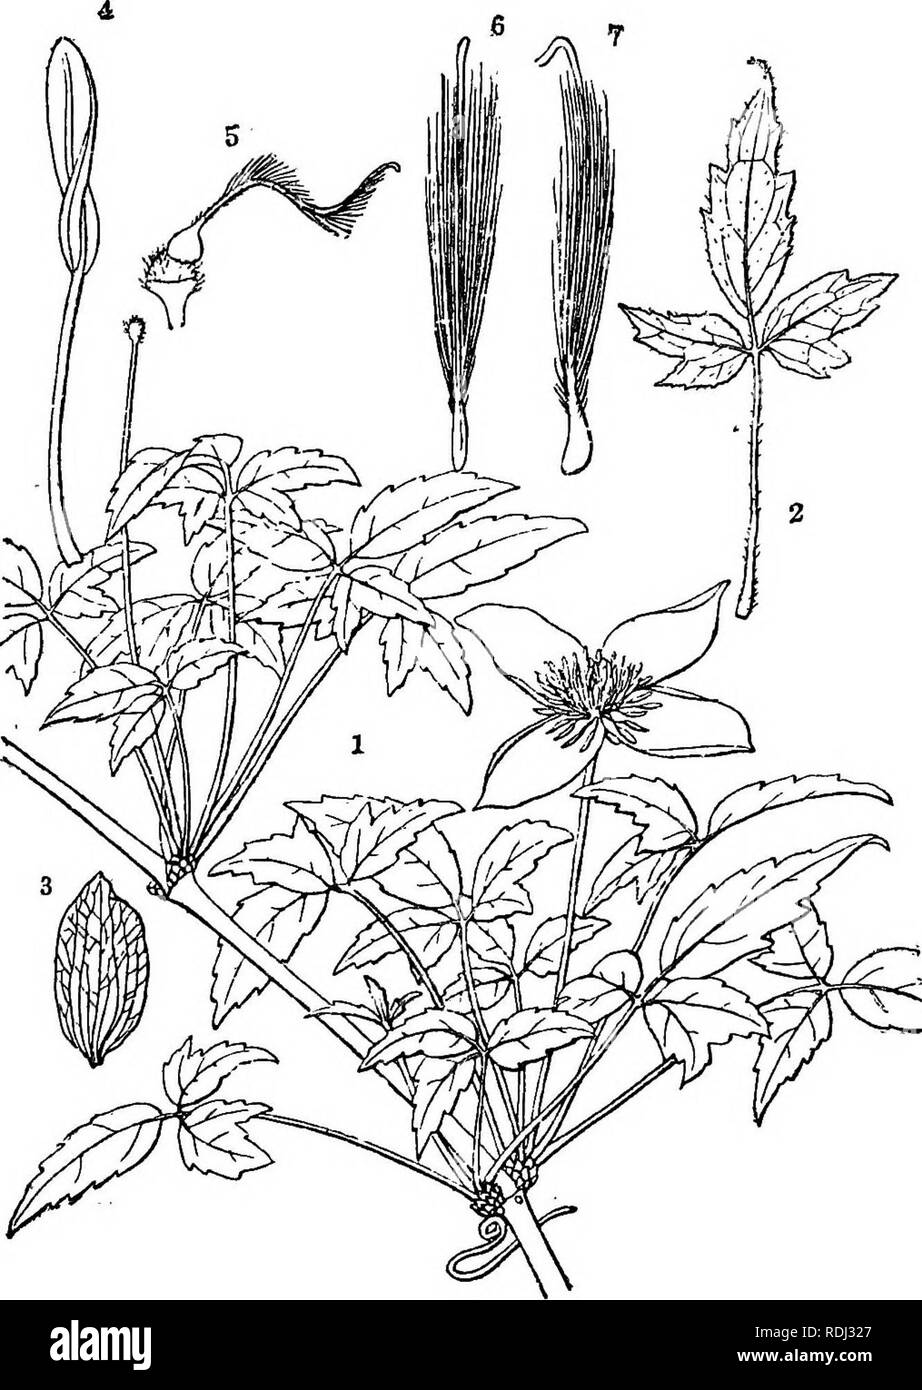 . Icones plantarum formosanarum nec non et contributiones ad floram formosanam; or, Icones of the plants of Formosa, and materials for a flora of the island, based on a study of the collections of the Botanical survey of the Government of Formosa. Botany. EANUNCULACEiE. 6 breve rostrato-acuta, apice attenuata ad stylum. abeuntia, 3^ mm. longa 1^ mm. lata. Hab. Ajisan, leg. B. Hatata et S. Sasaki, Jan. 1912. Differs from the type by the much thinner and less serrate leaves. Clematis insulari-alpina Hayata sp. nov. (Fig. 1.) Scandens, cauHs glaber tenuissime pluri-sulcatus, internodiis 7 cm. lon Stock Photo